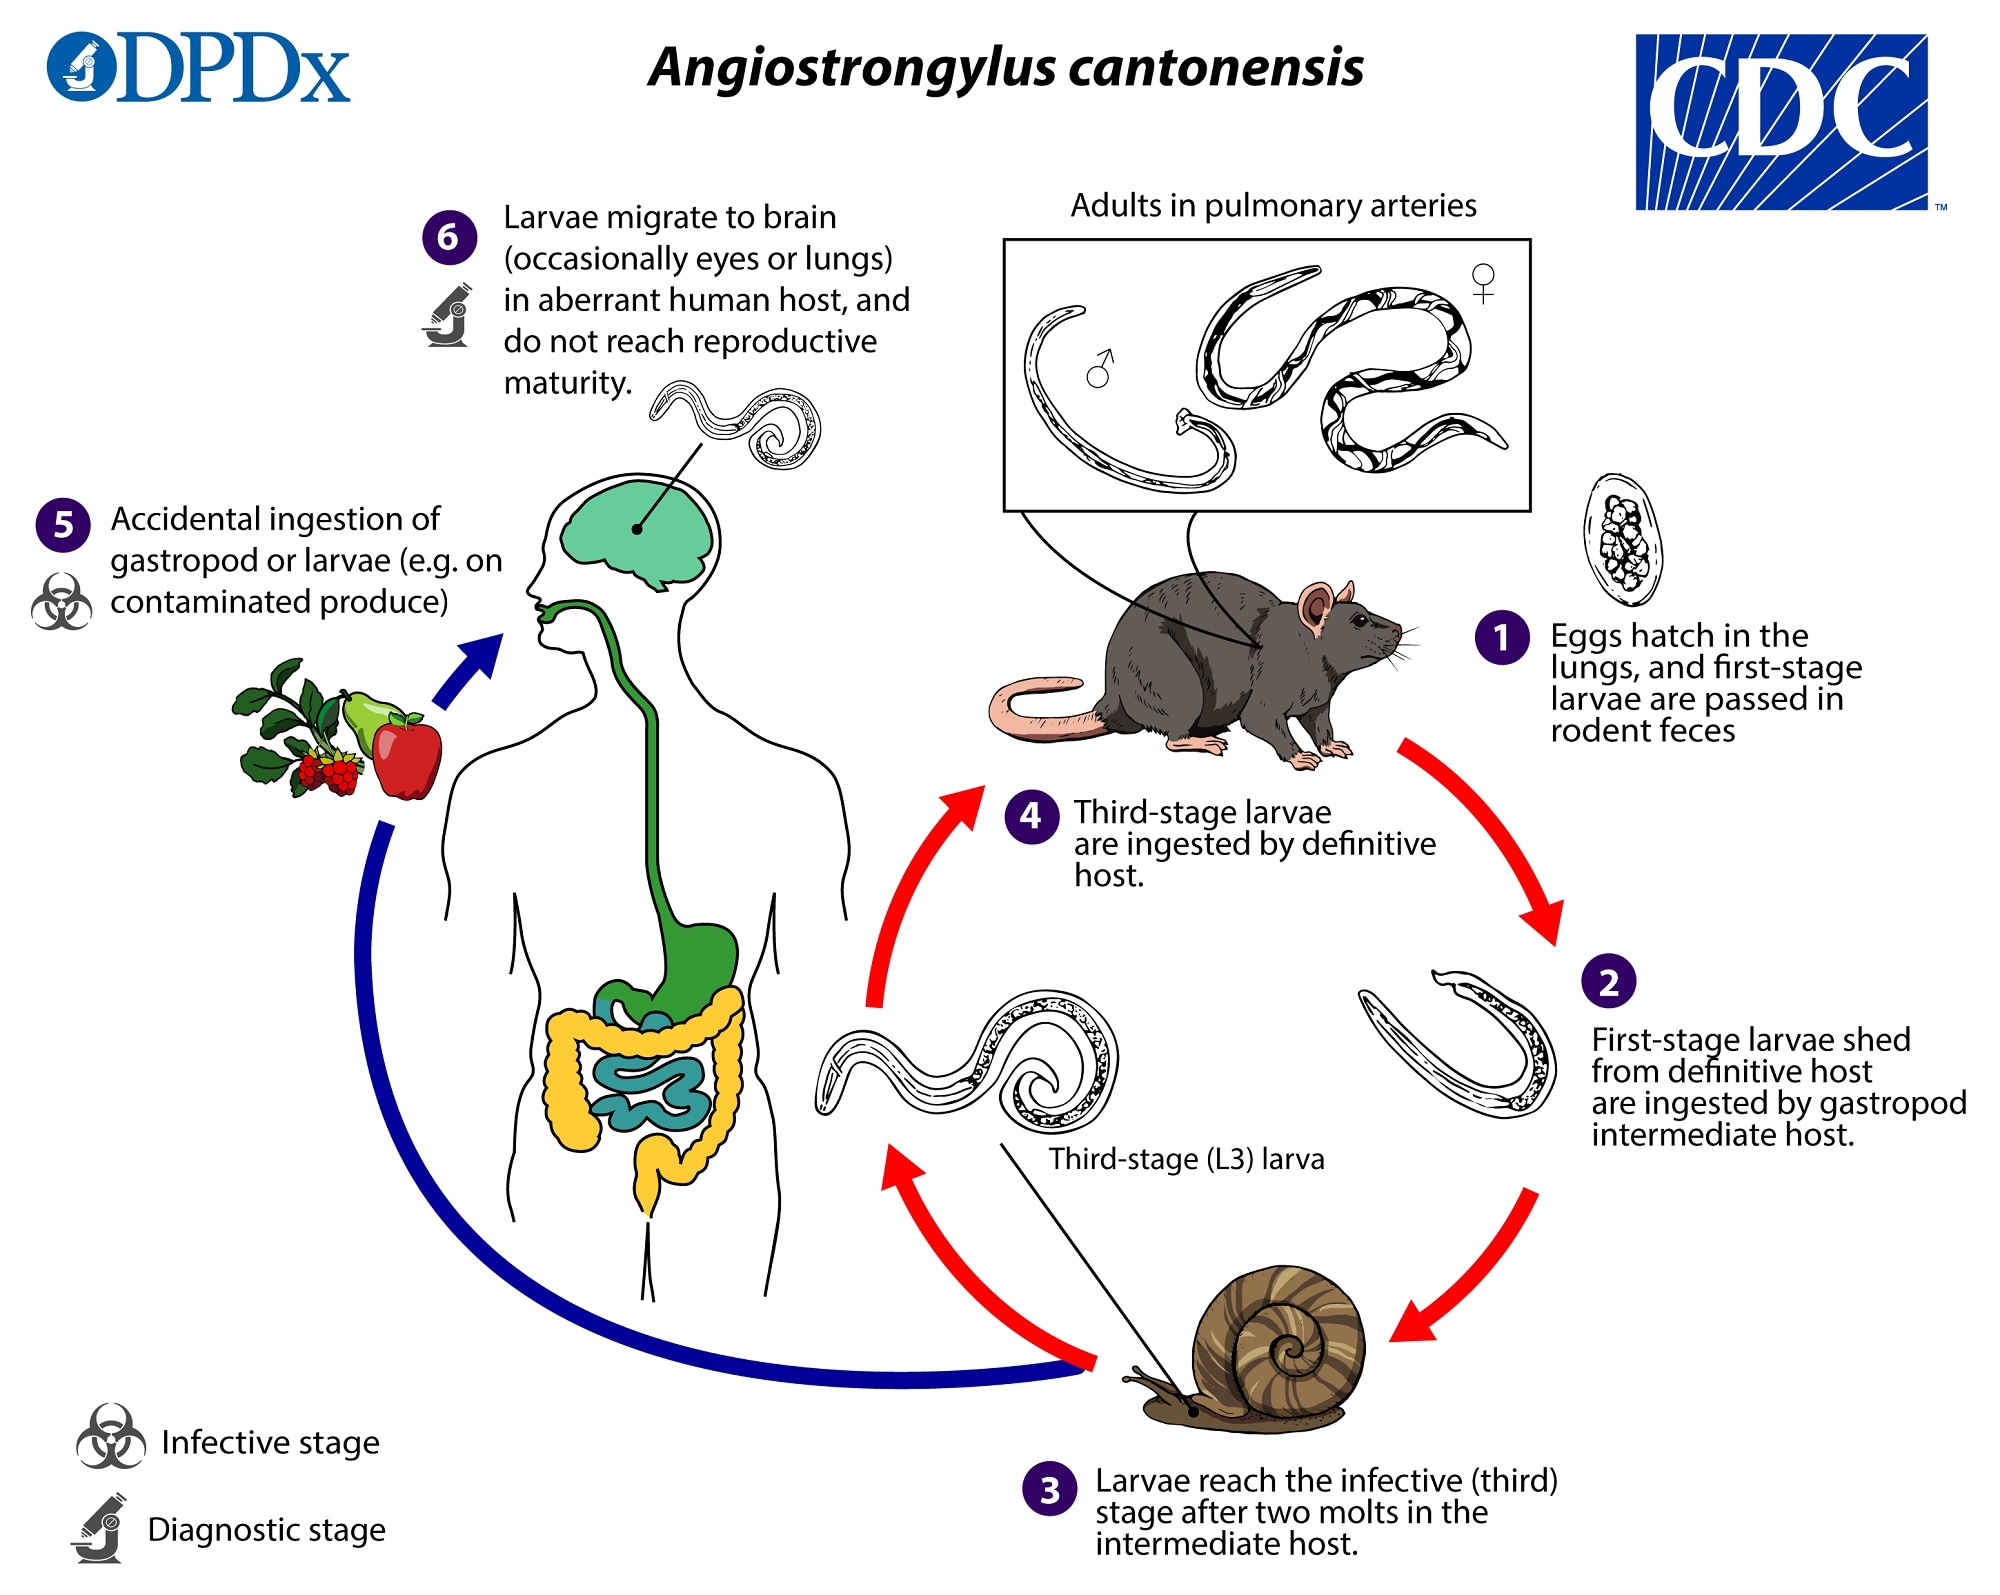 CDC - Angiostrongylus cantonensis - Biology